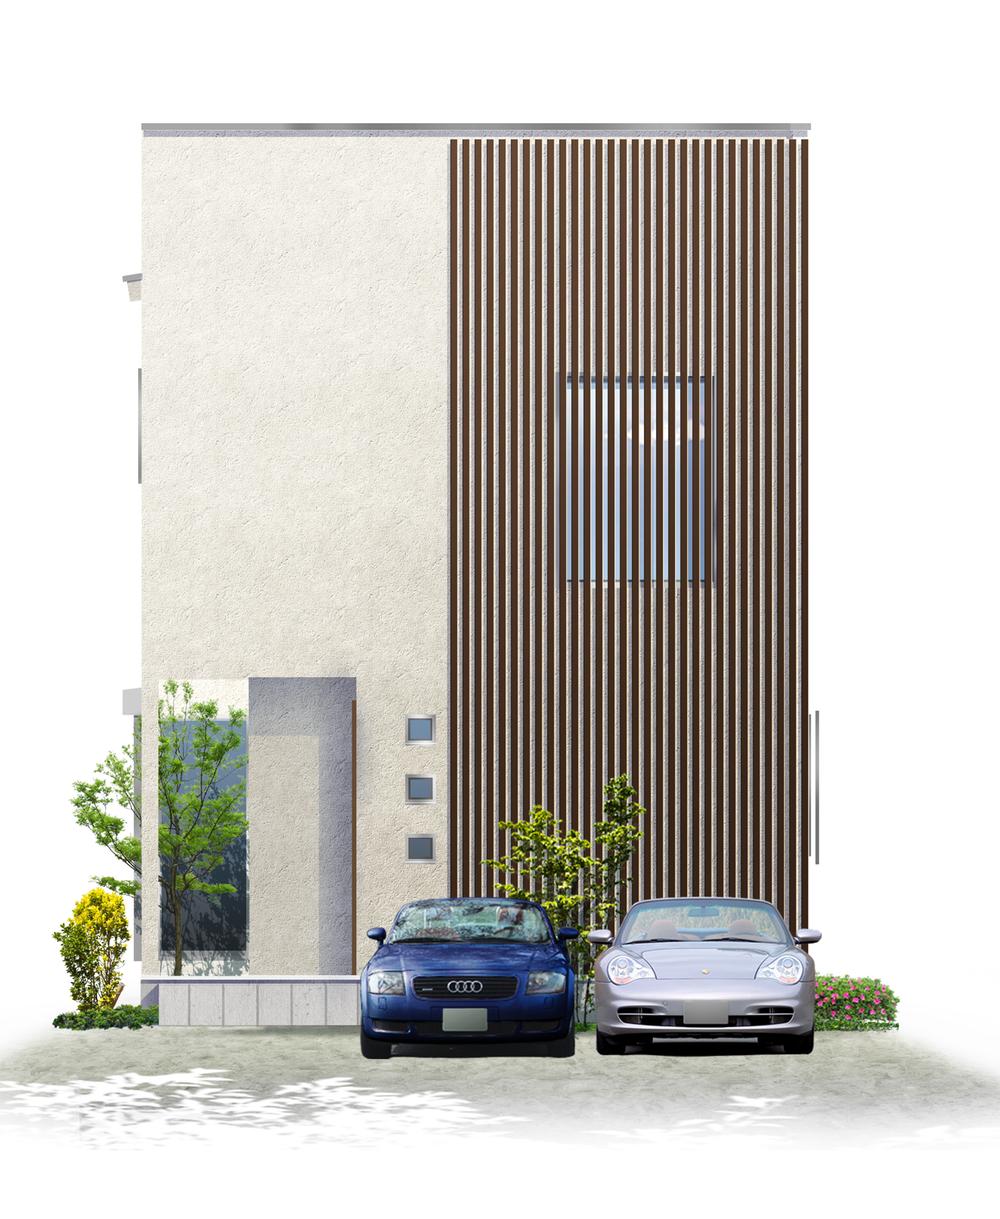 Building plan example (Perth ・ appearance). Building plan example (No. 1 place) Building Price      Ten thousand yen, Building area 102.67 sq m